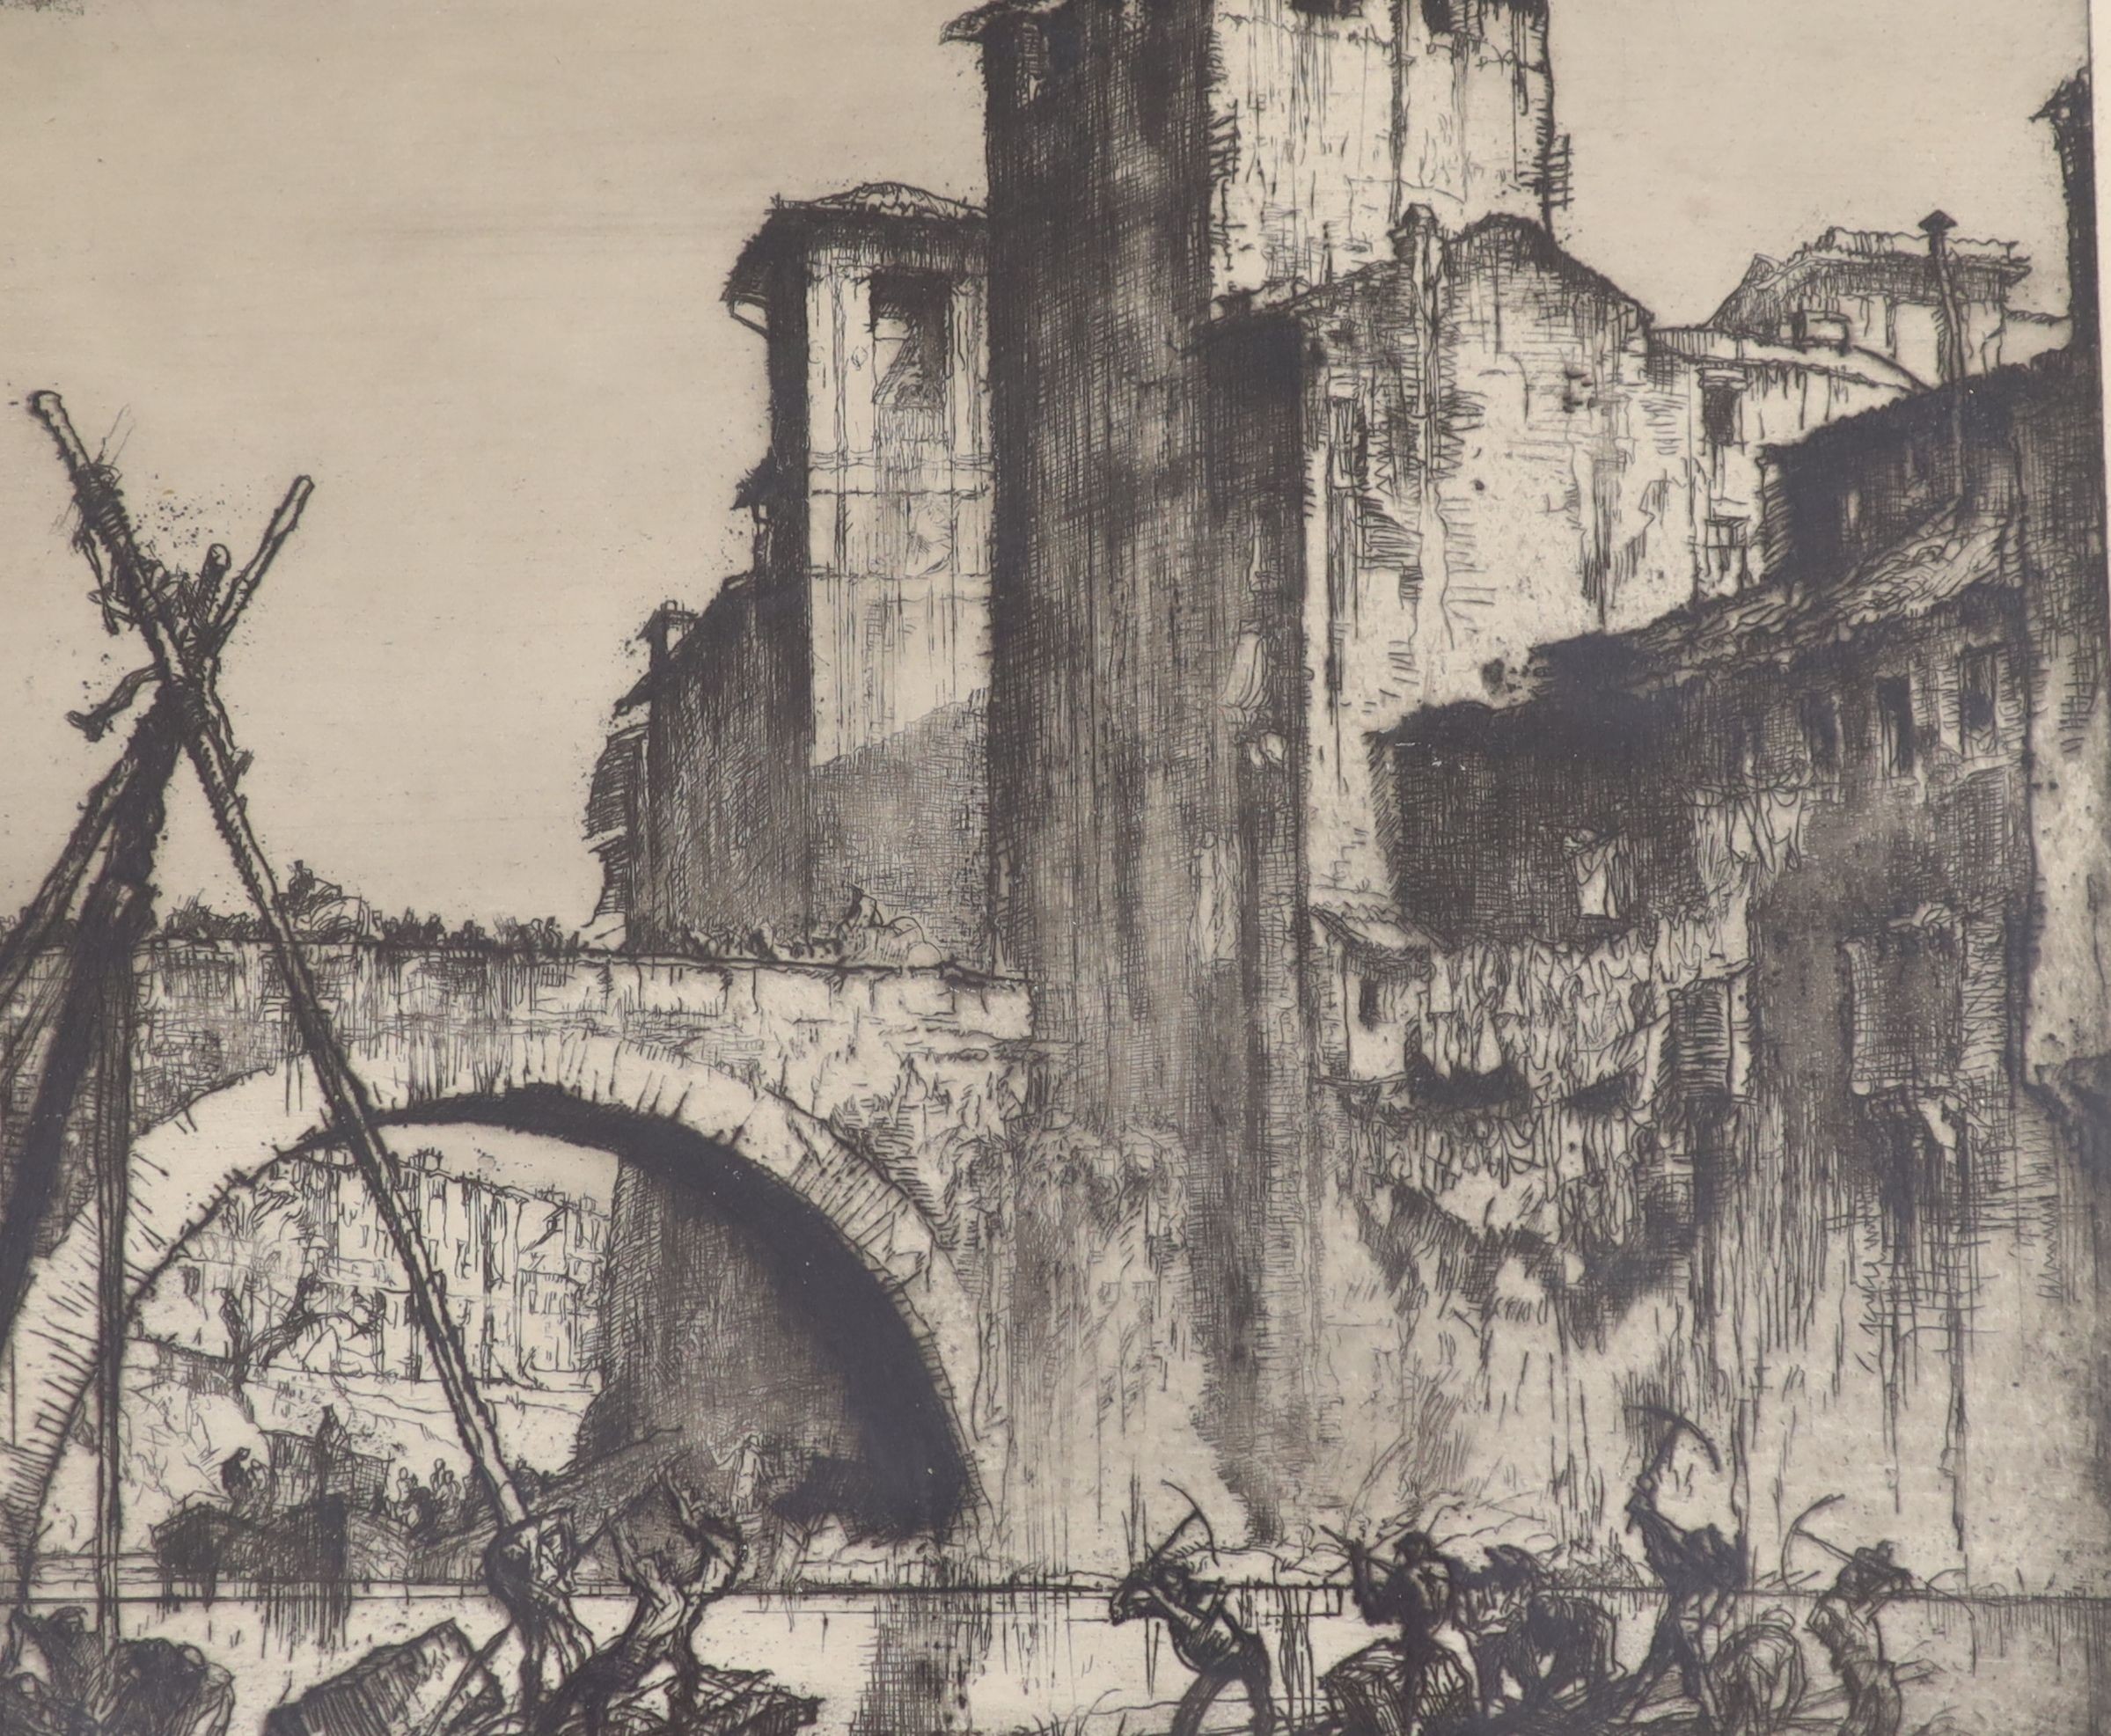 Frank Brangwyn (1867-1956), three etchings, Spanish Bridge, Tour de Faure, and Bridge viewed from beside a tree, all signed in pencil, 30 x 35cm, 25 x 35cm and 27 x 37cm